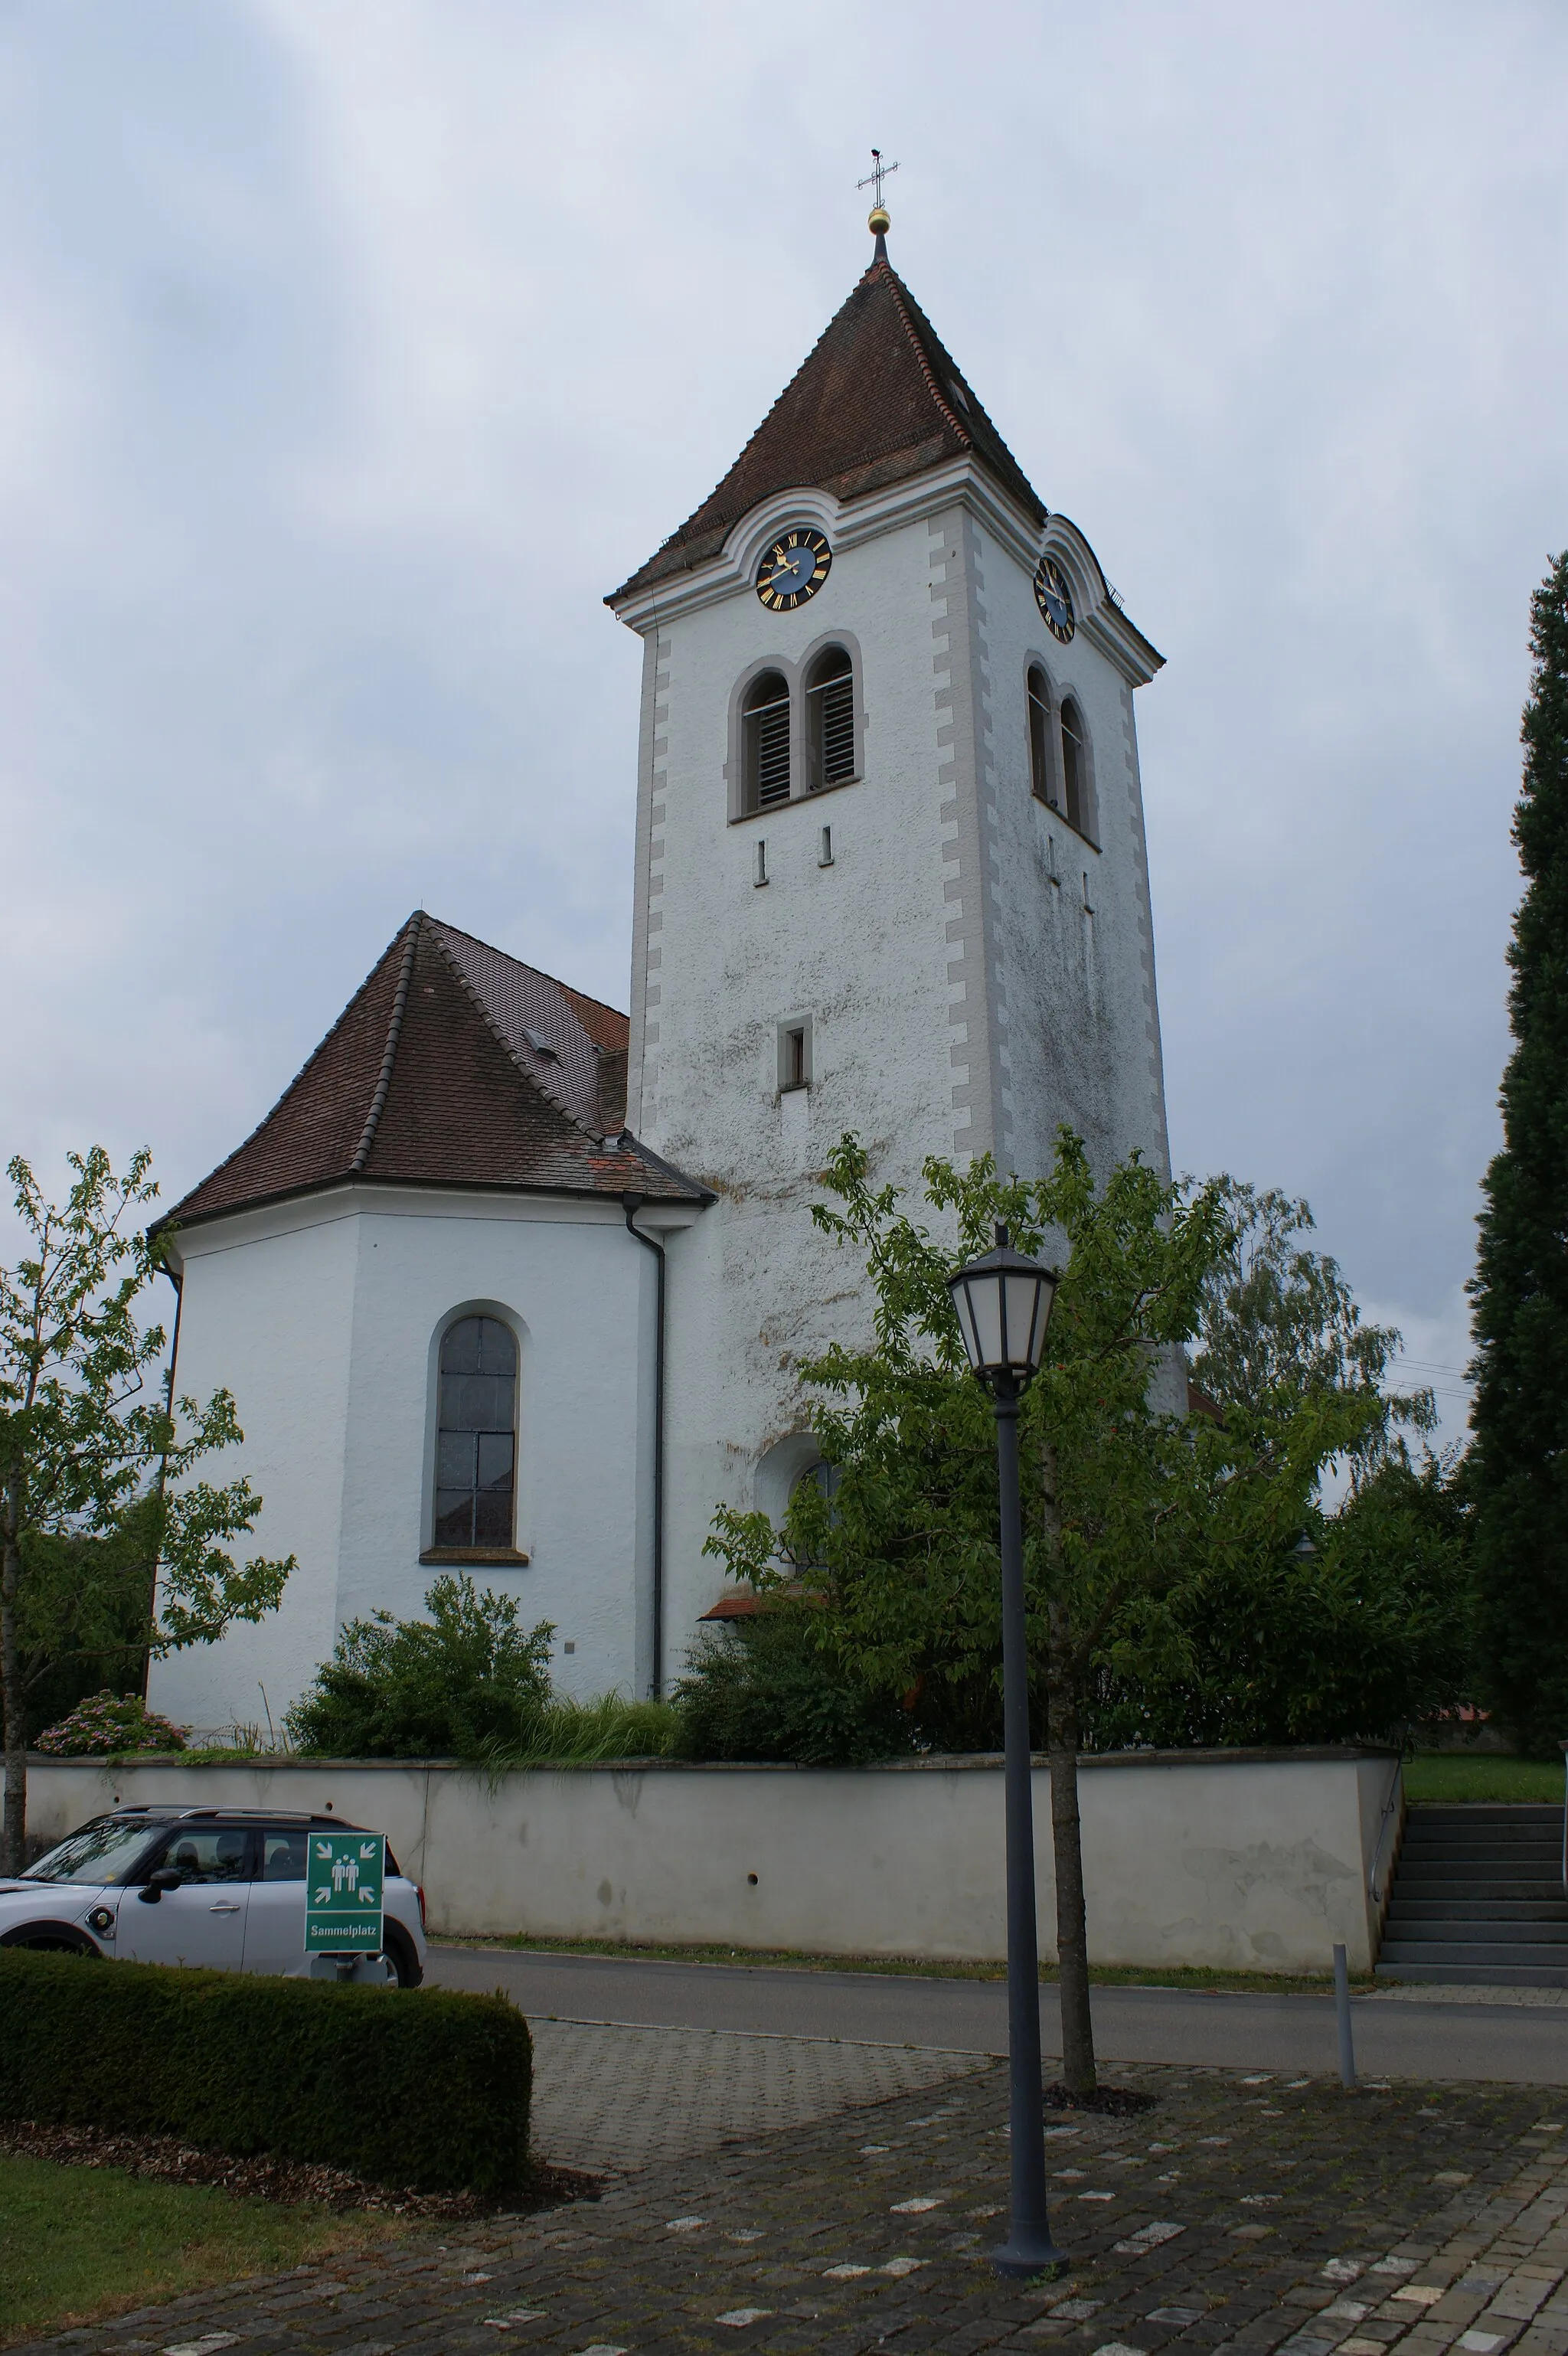 Photo showing: Parish church of St. Peter and Paul in the Herdwangen district in the municipality of Herdwangen-Schoenach in Baden-Wuerttemberg in Germany.